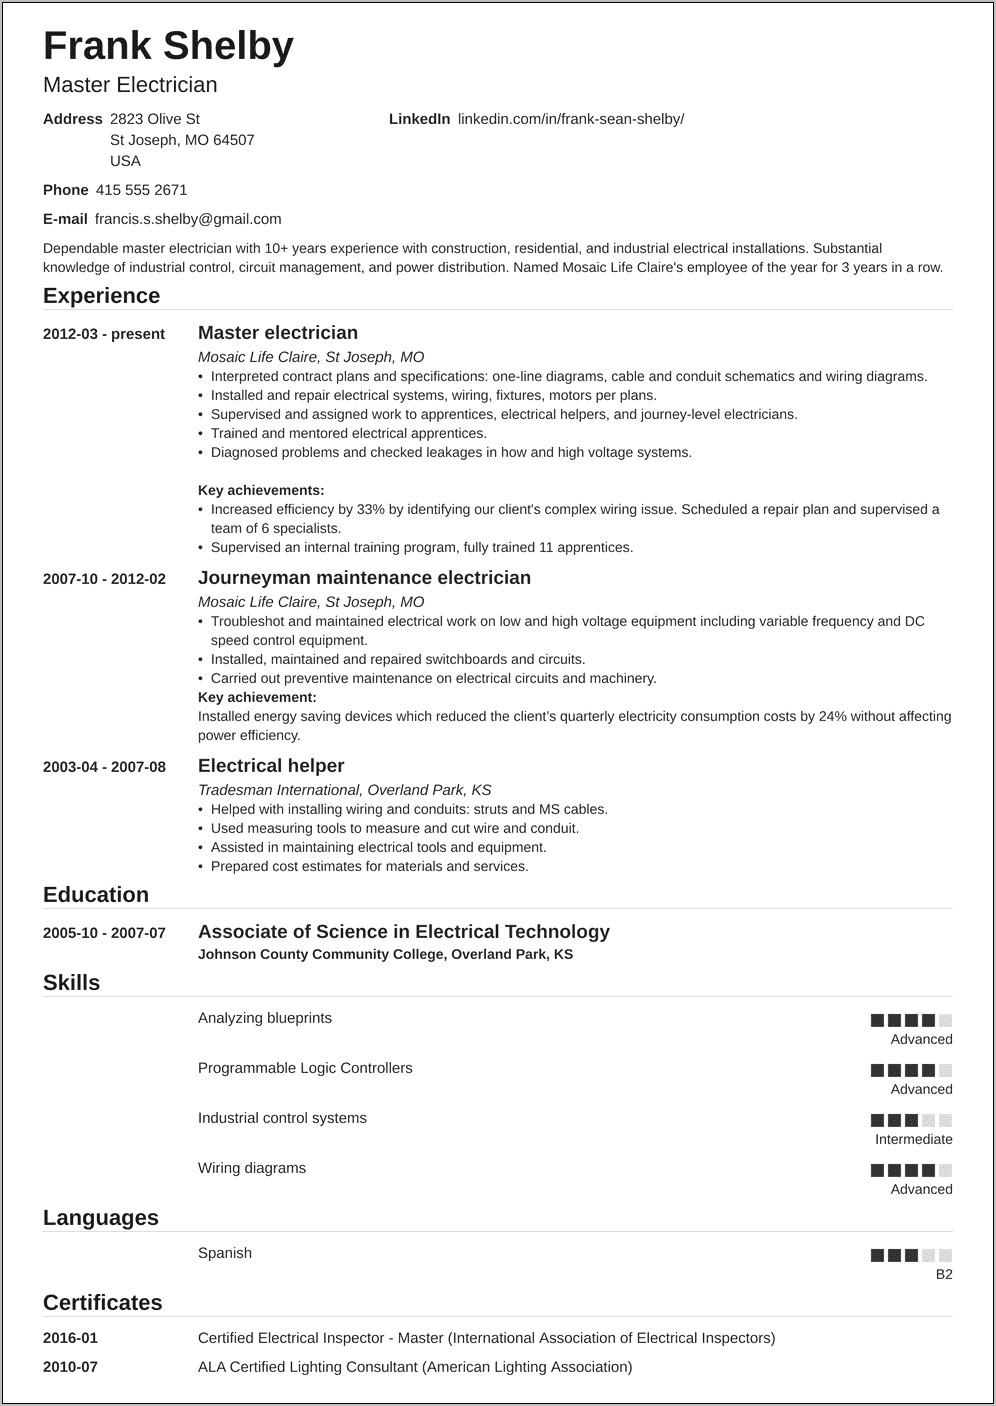 Resume Summary For An Apprentice Electrician